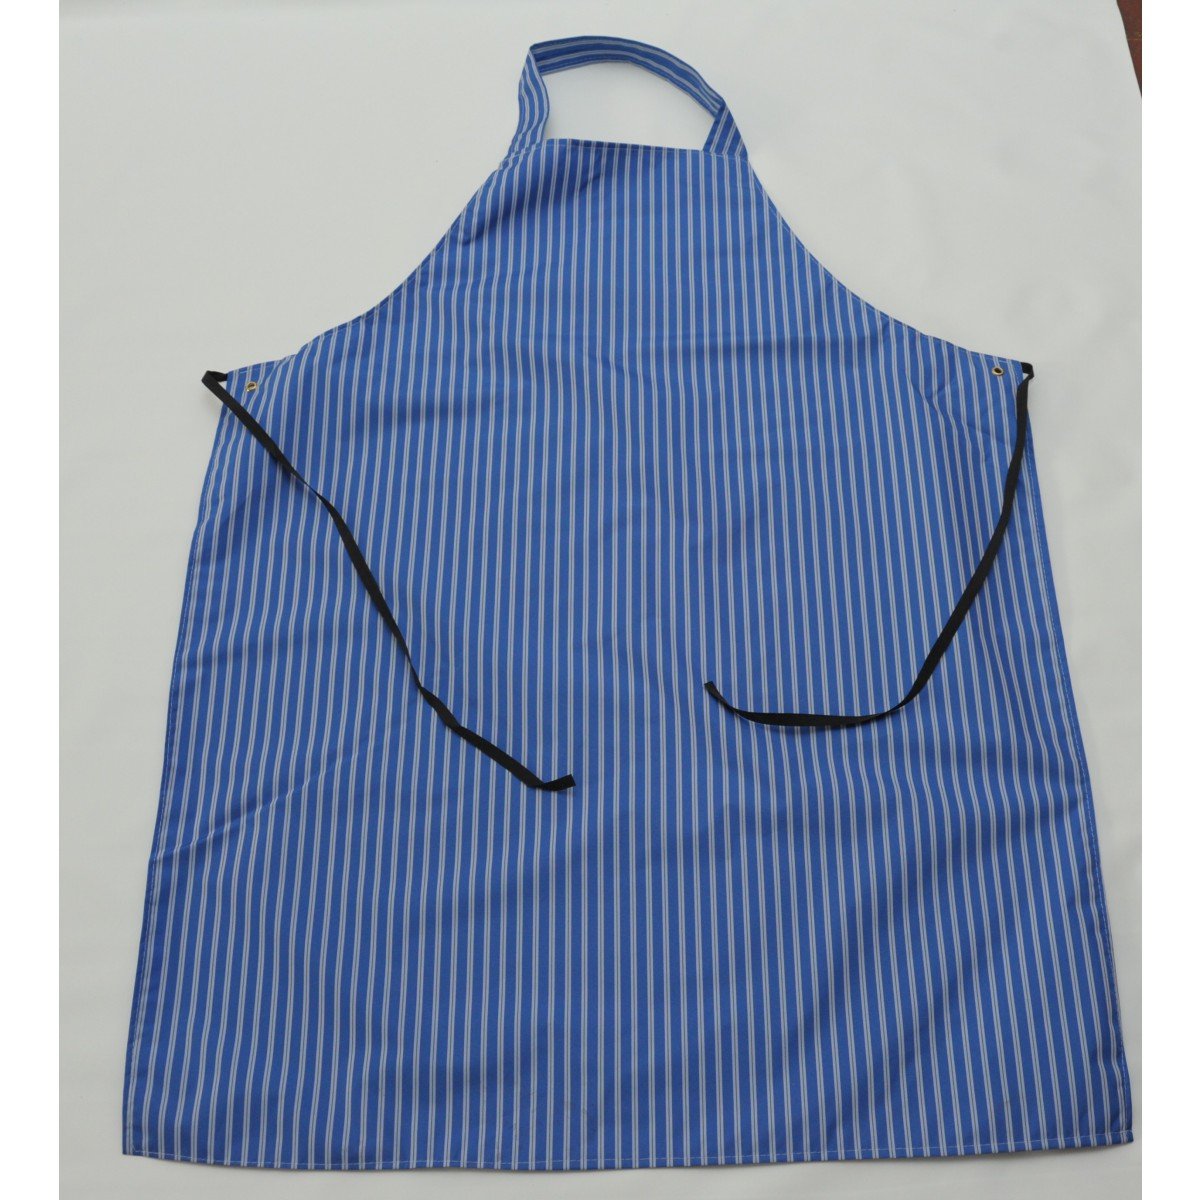 Butchers Twin Striped Apron Blue and White 42 x 36 Inch